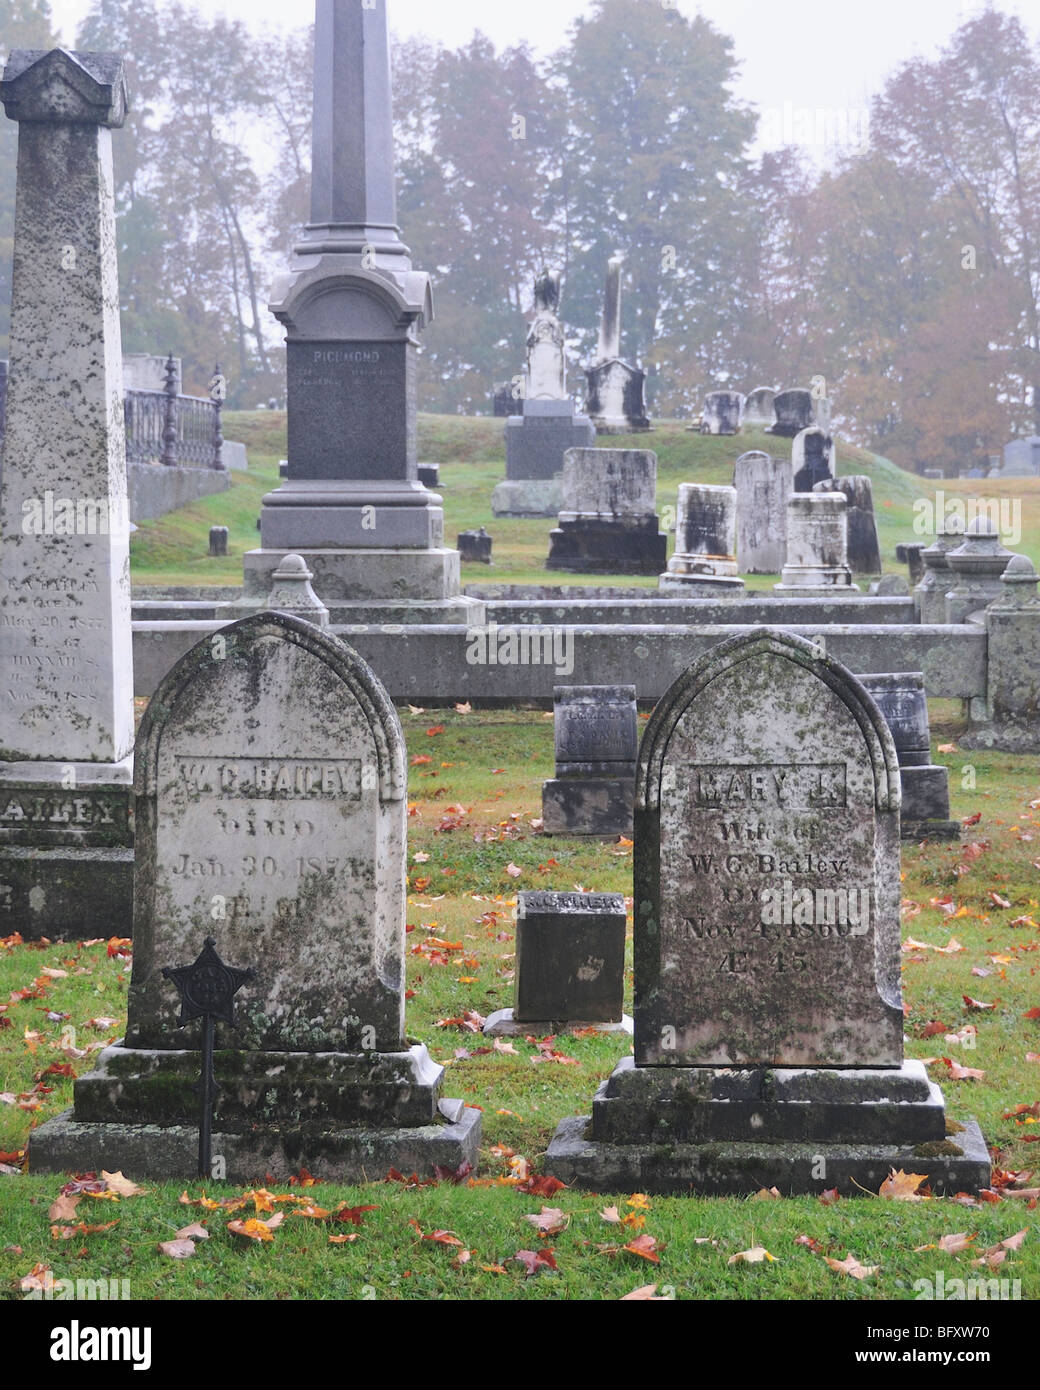 Autumn rain and fog lends a spooky atmosphere to the mossy gravestones in an old 1800s cemetery in Maine, USA. Stock Photo